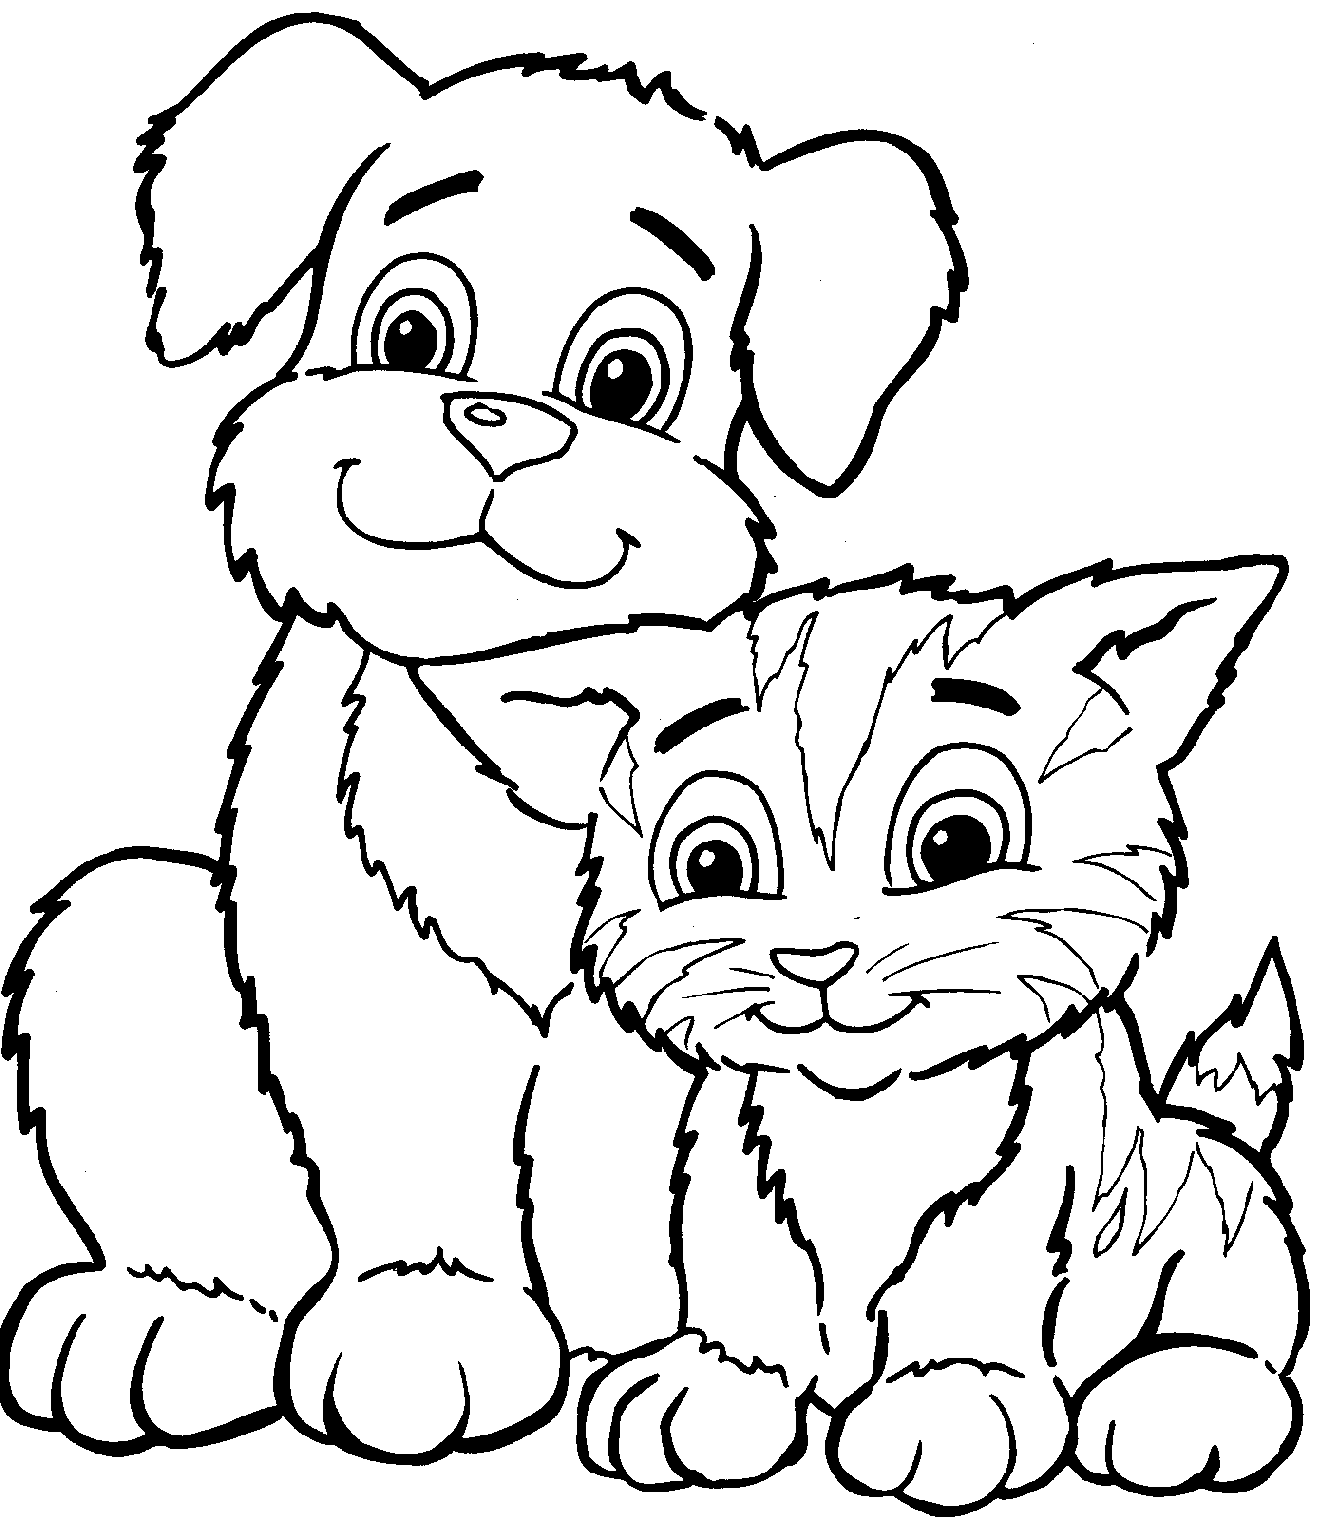 cat coloring pages free printable free printable cat coloring pages for kids printable free pages coloring cat 